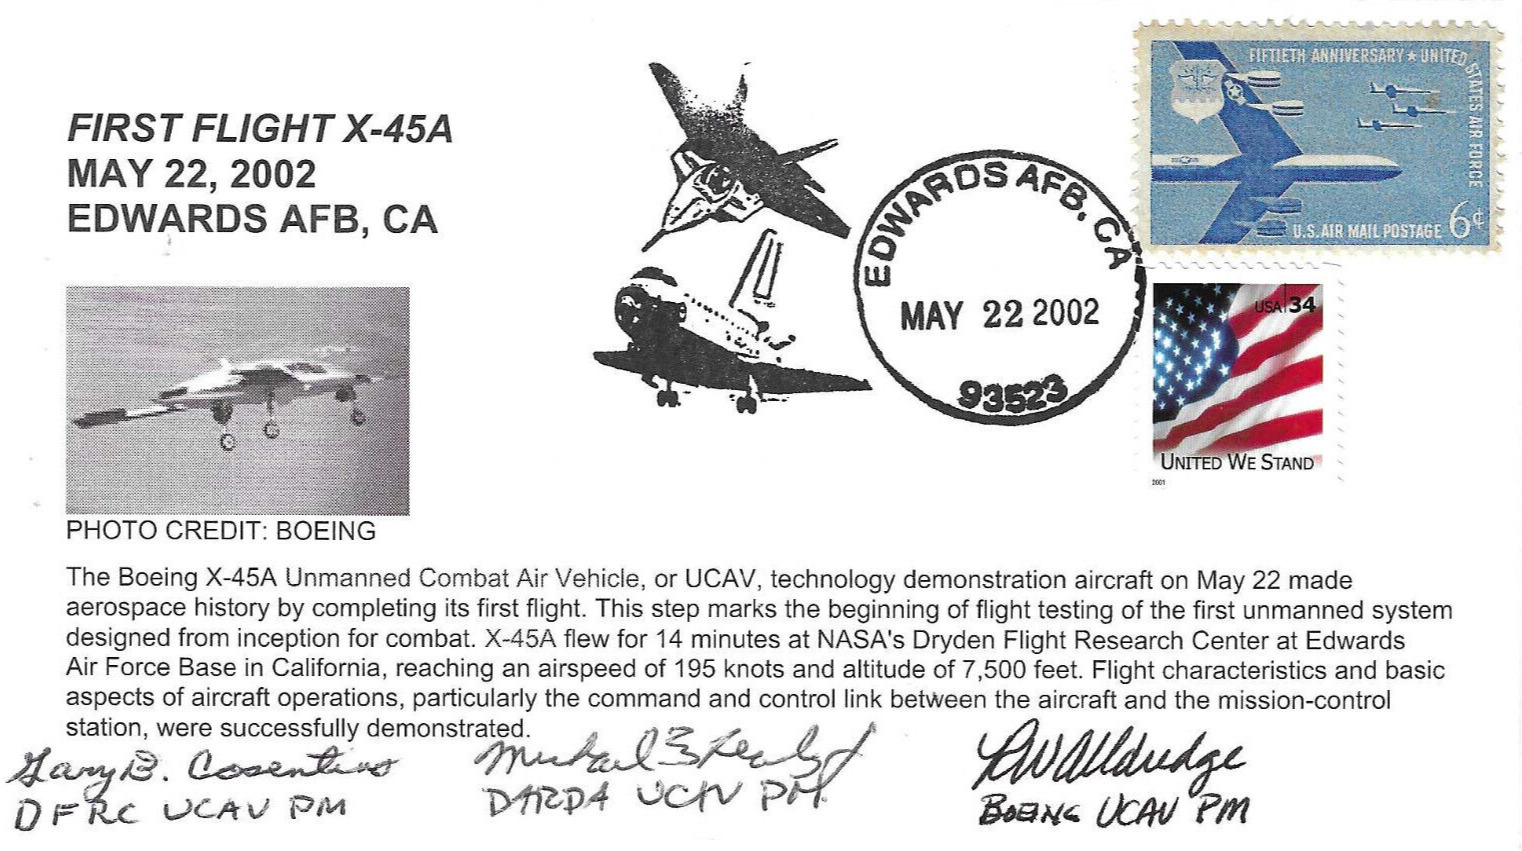 Cover honoring the X-45A with autographs